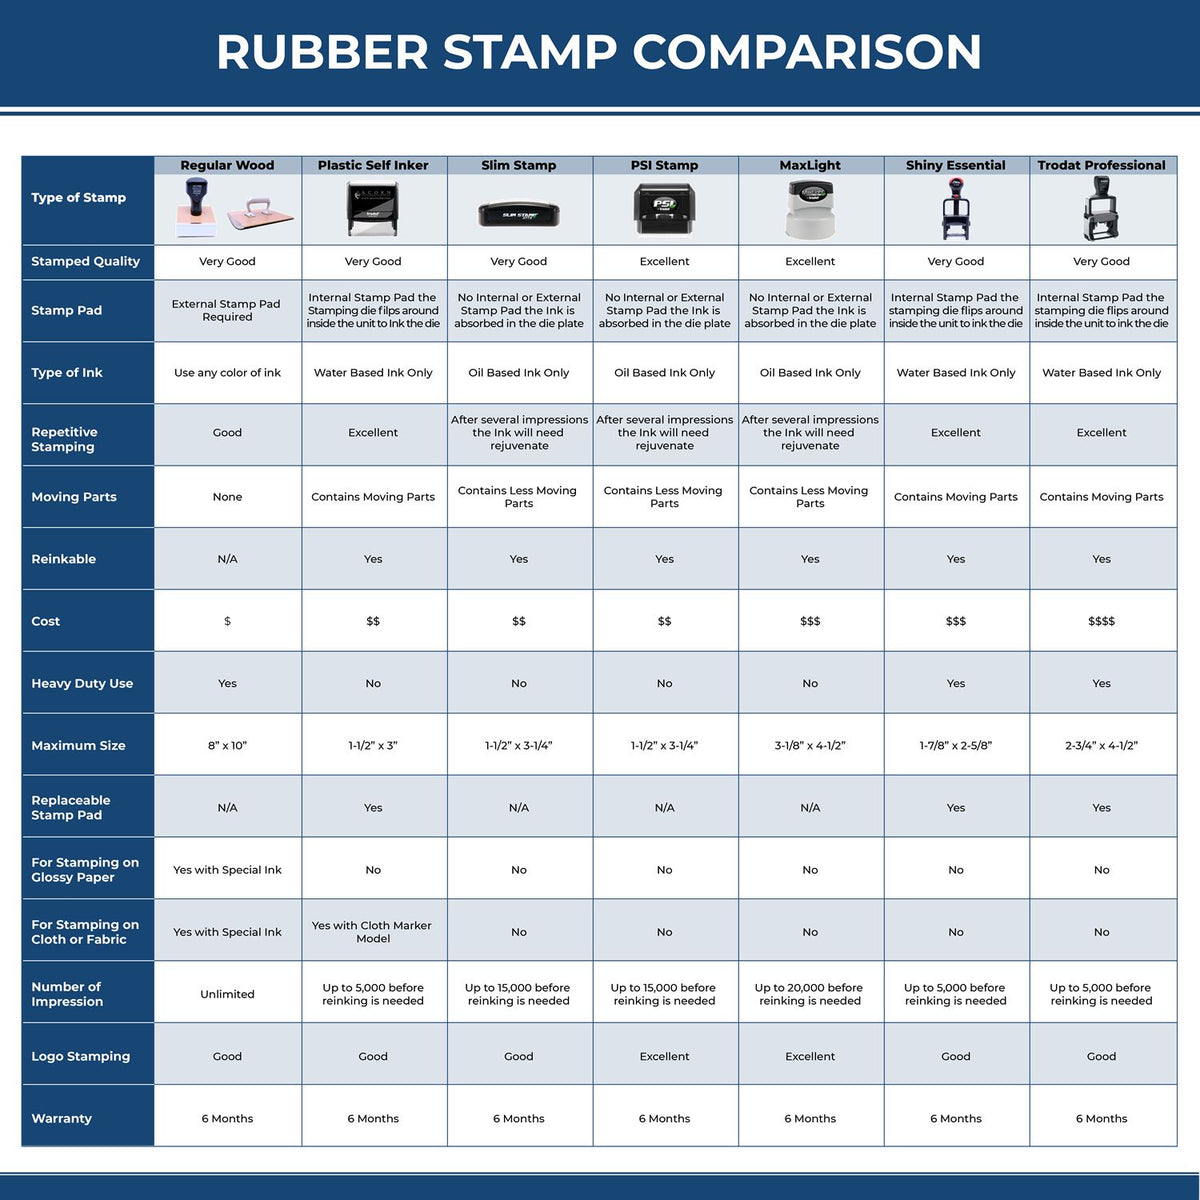 A comparison chart for the different types of mount models available for the PSI Connecticut Notary Stamp.